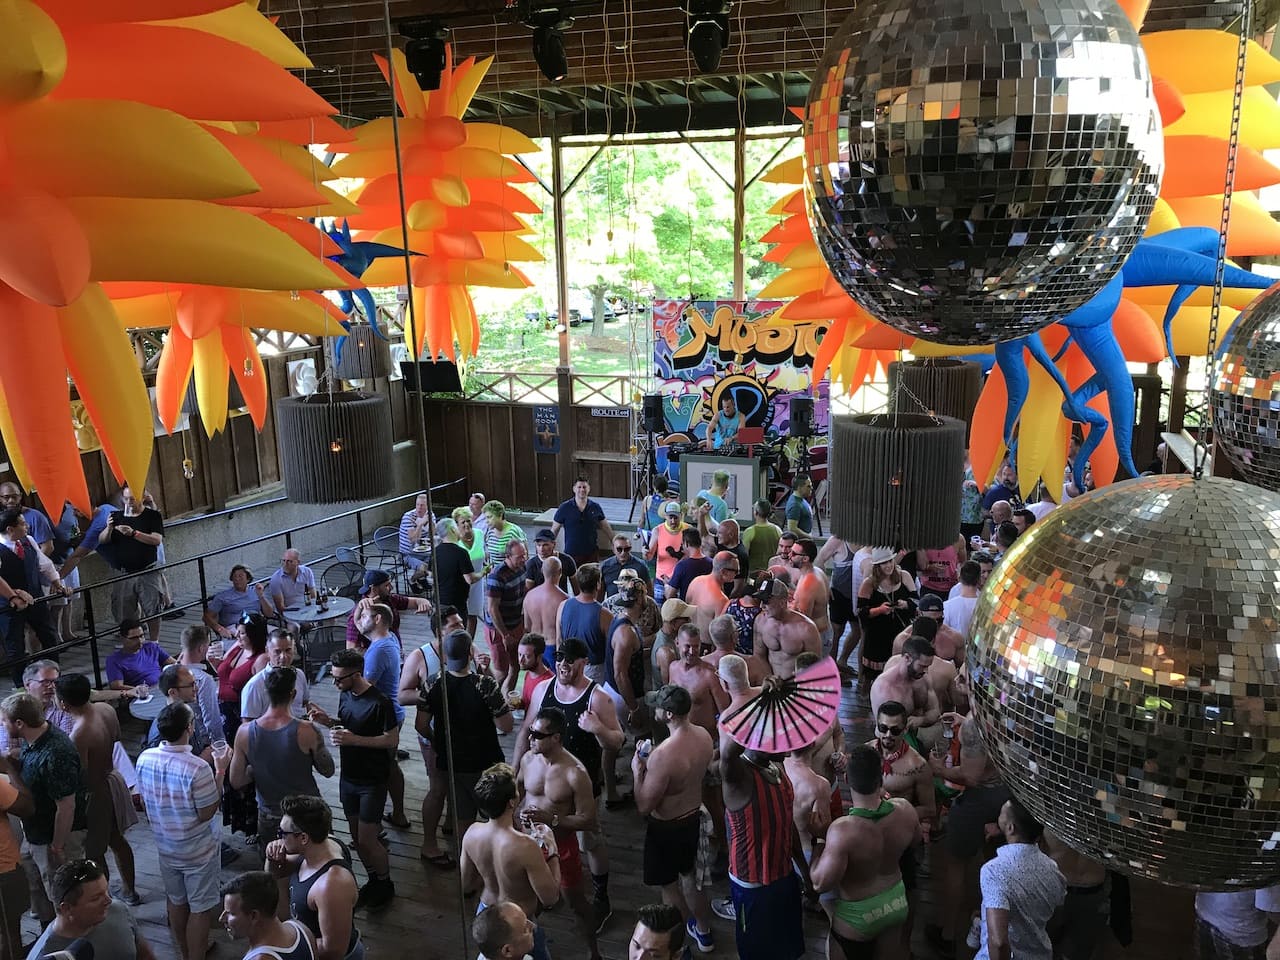 Disco balls and drag queens: Inside a thriving LGBTQ community along the shores of Lake Michigan